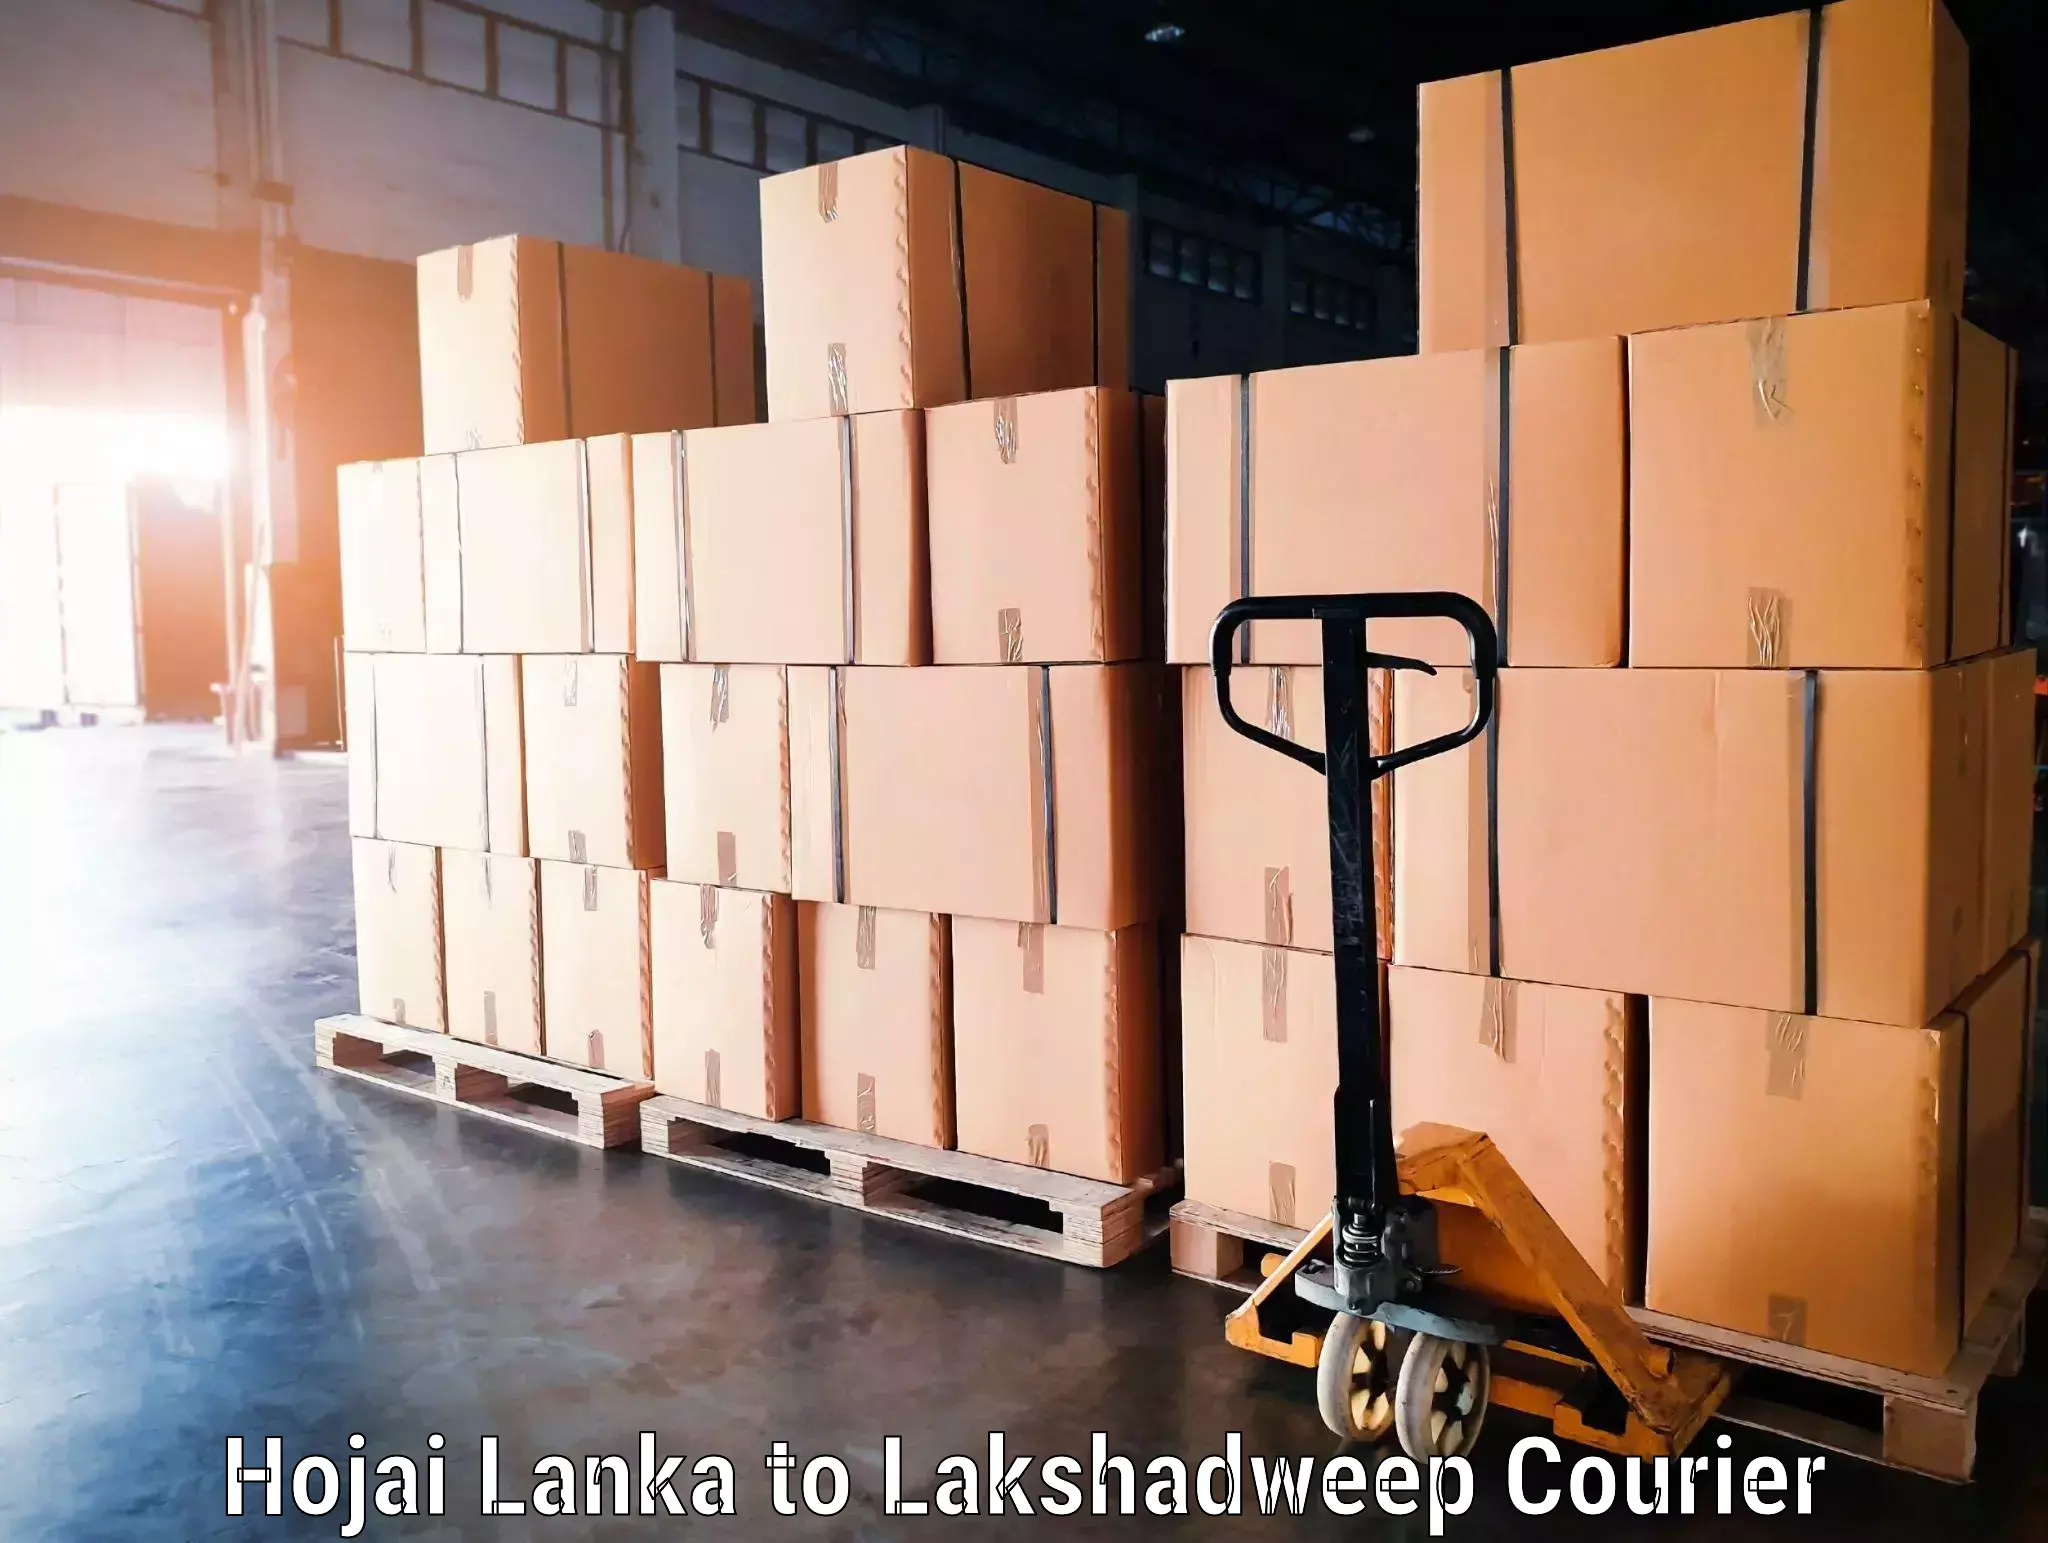 Luggage storage and delivery in Hojai Lanka to Lakshadweep